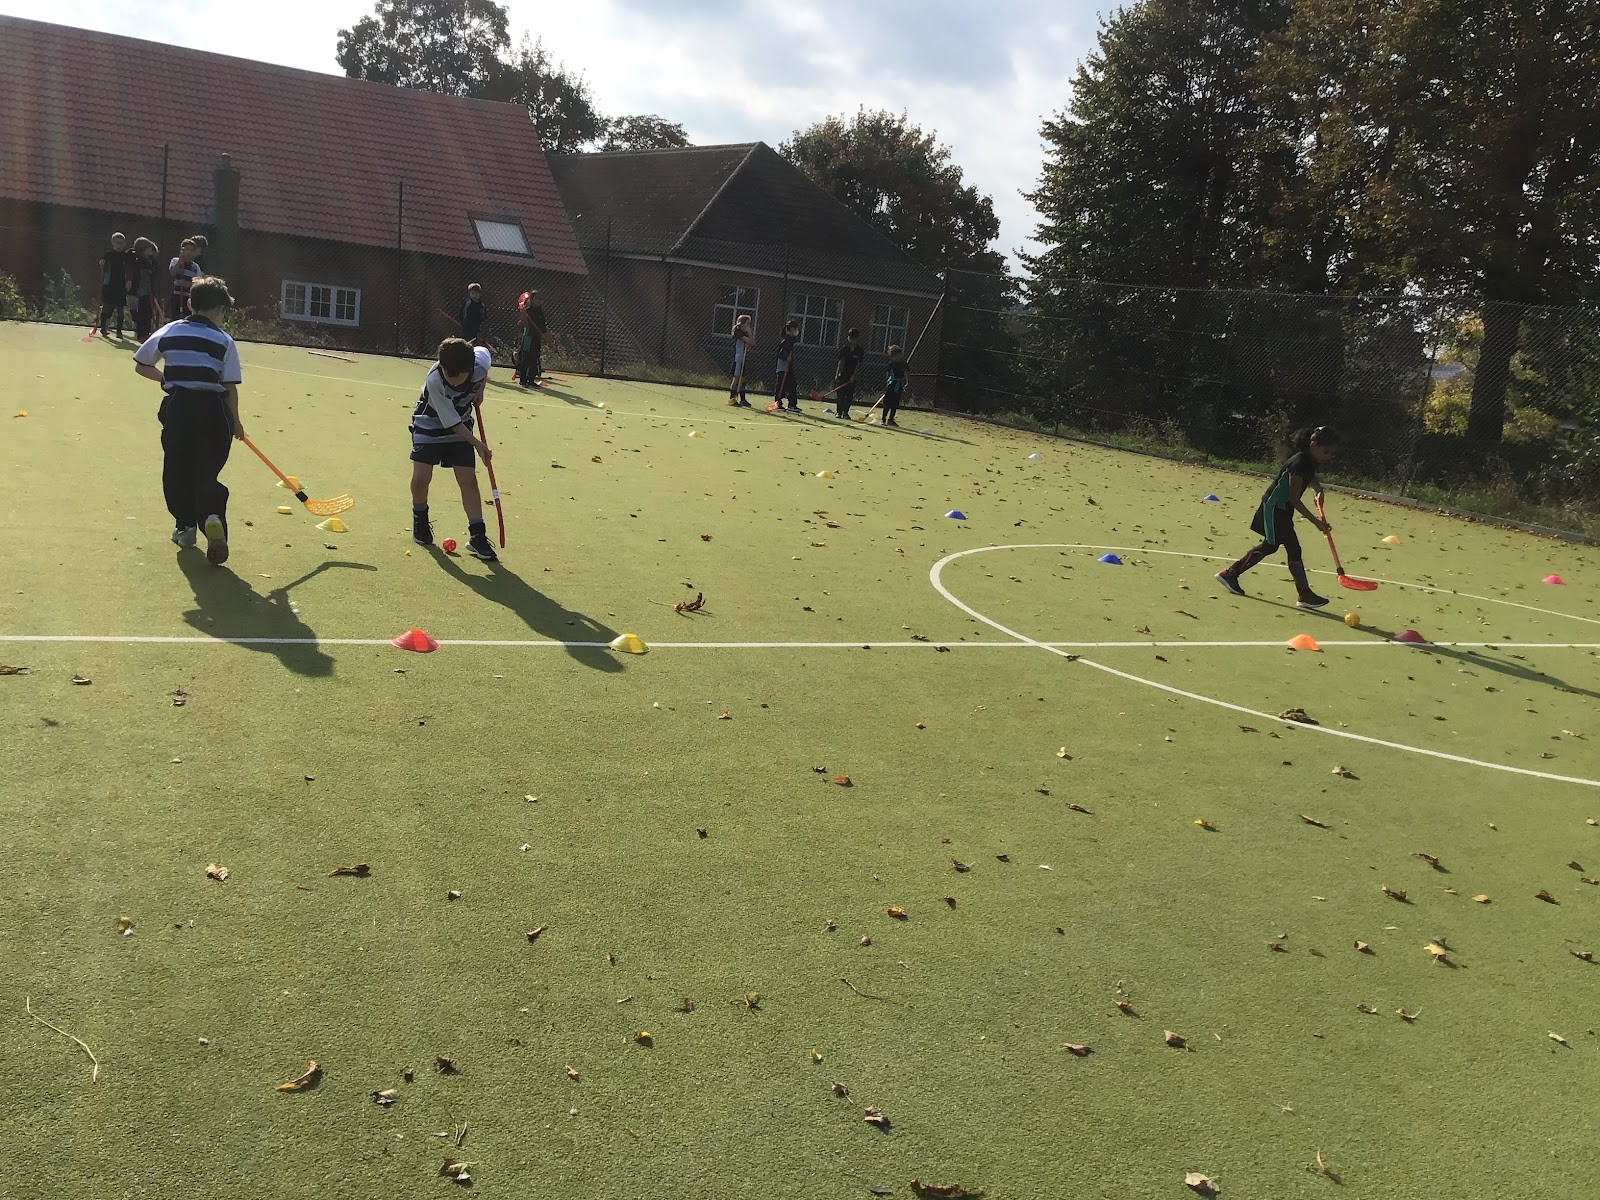 Year four collaboration day - hockey game